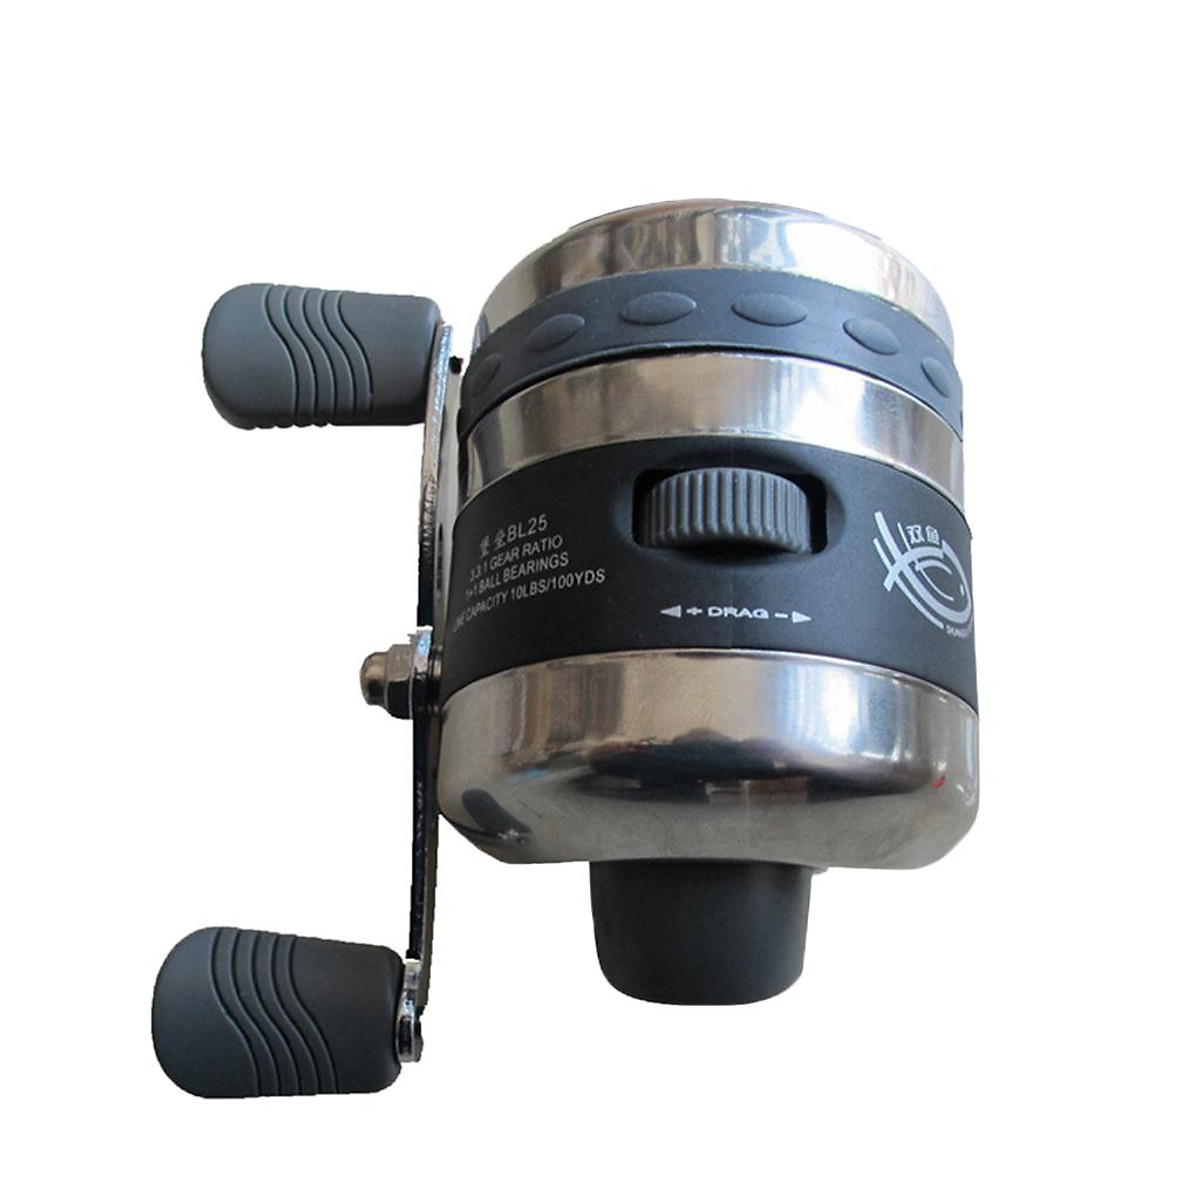 Mua Stainless Steel Spincast Fishing Reel 1+1BB 3.1:1 Saltwater Under-spin  Reel tại Magideal2